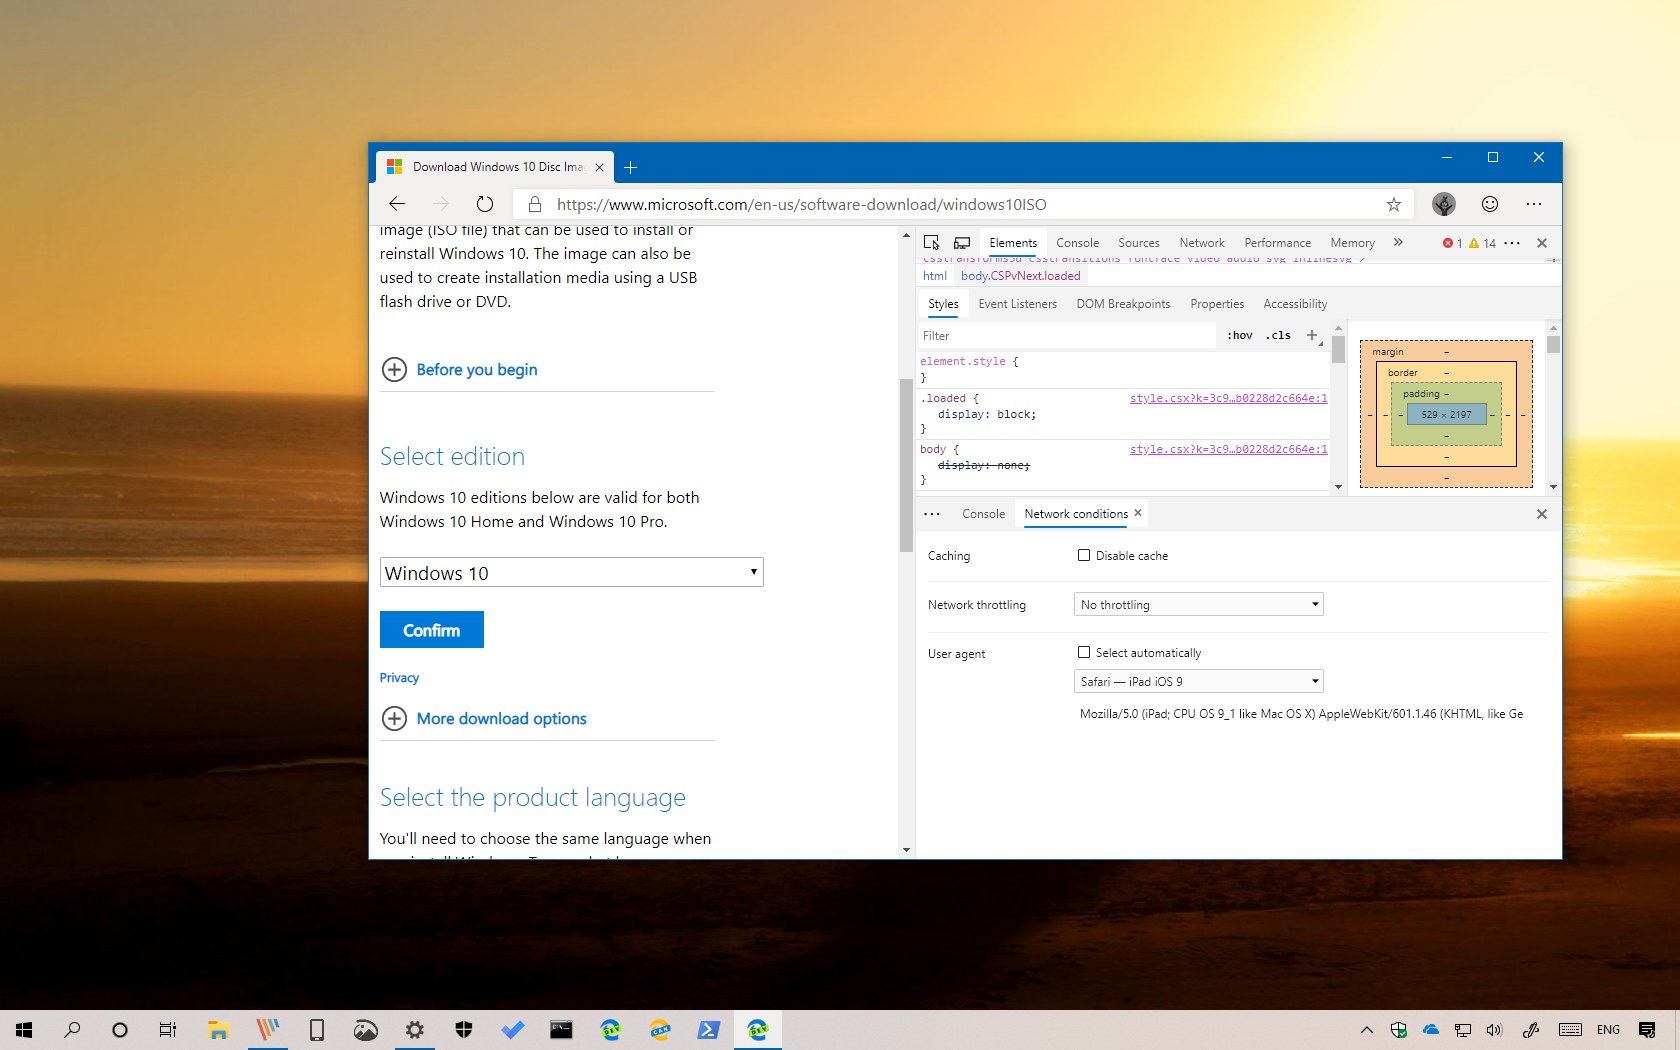 how to download latest windows 10 iso file for free